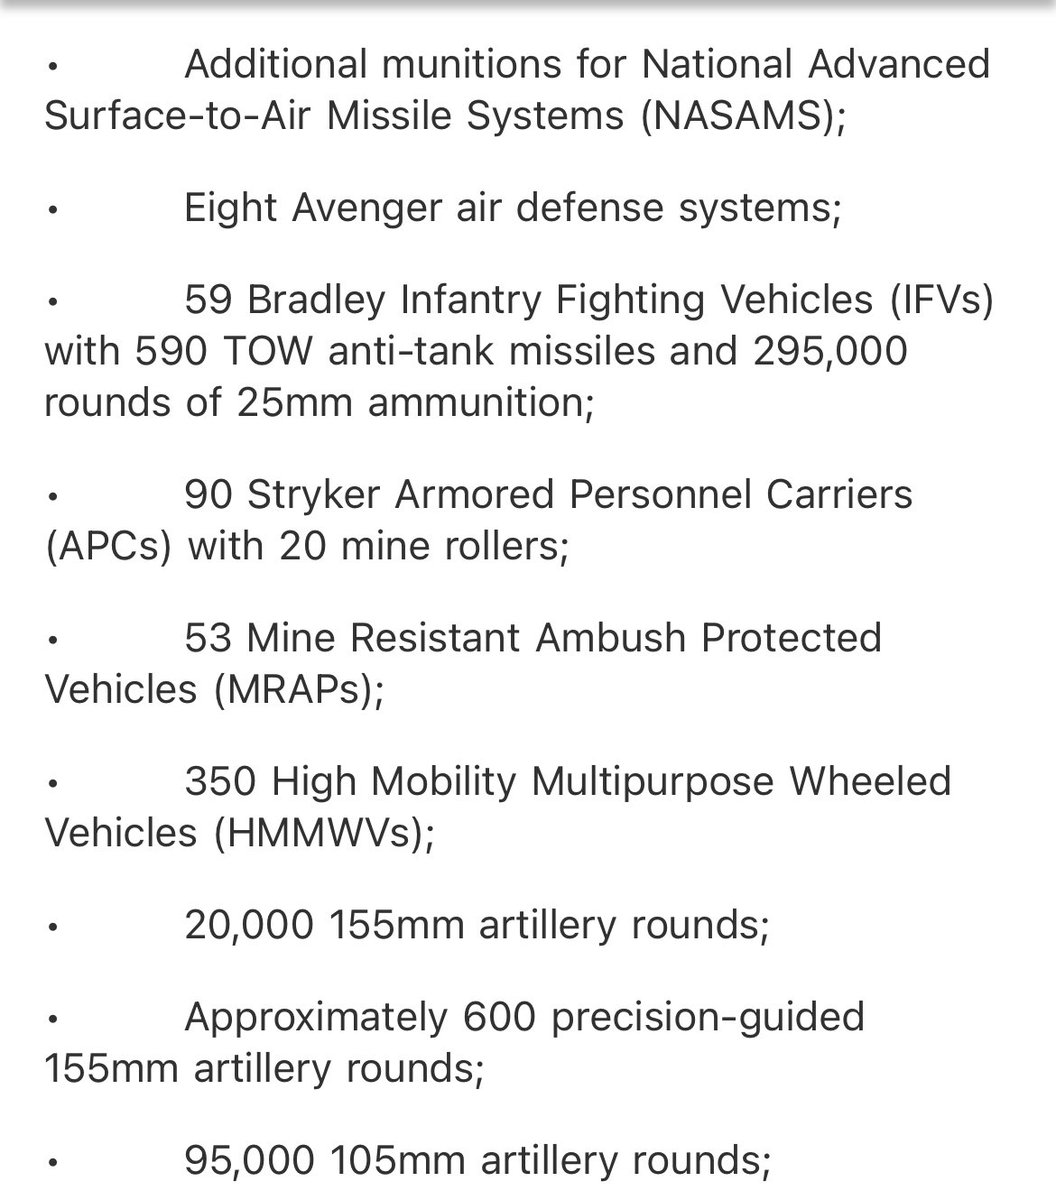 New US $2.5 billion military aid package for Ukraine contains 90 Stryker APCs for the first time. 59 more Bradley Fighting Vehicles. (50 previously.) But no tanks. Brings total to $27.4 billion in security assistance to Ukraine since the beginning of the Biden Administration